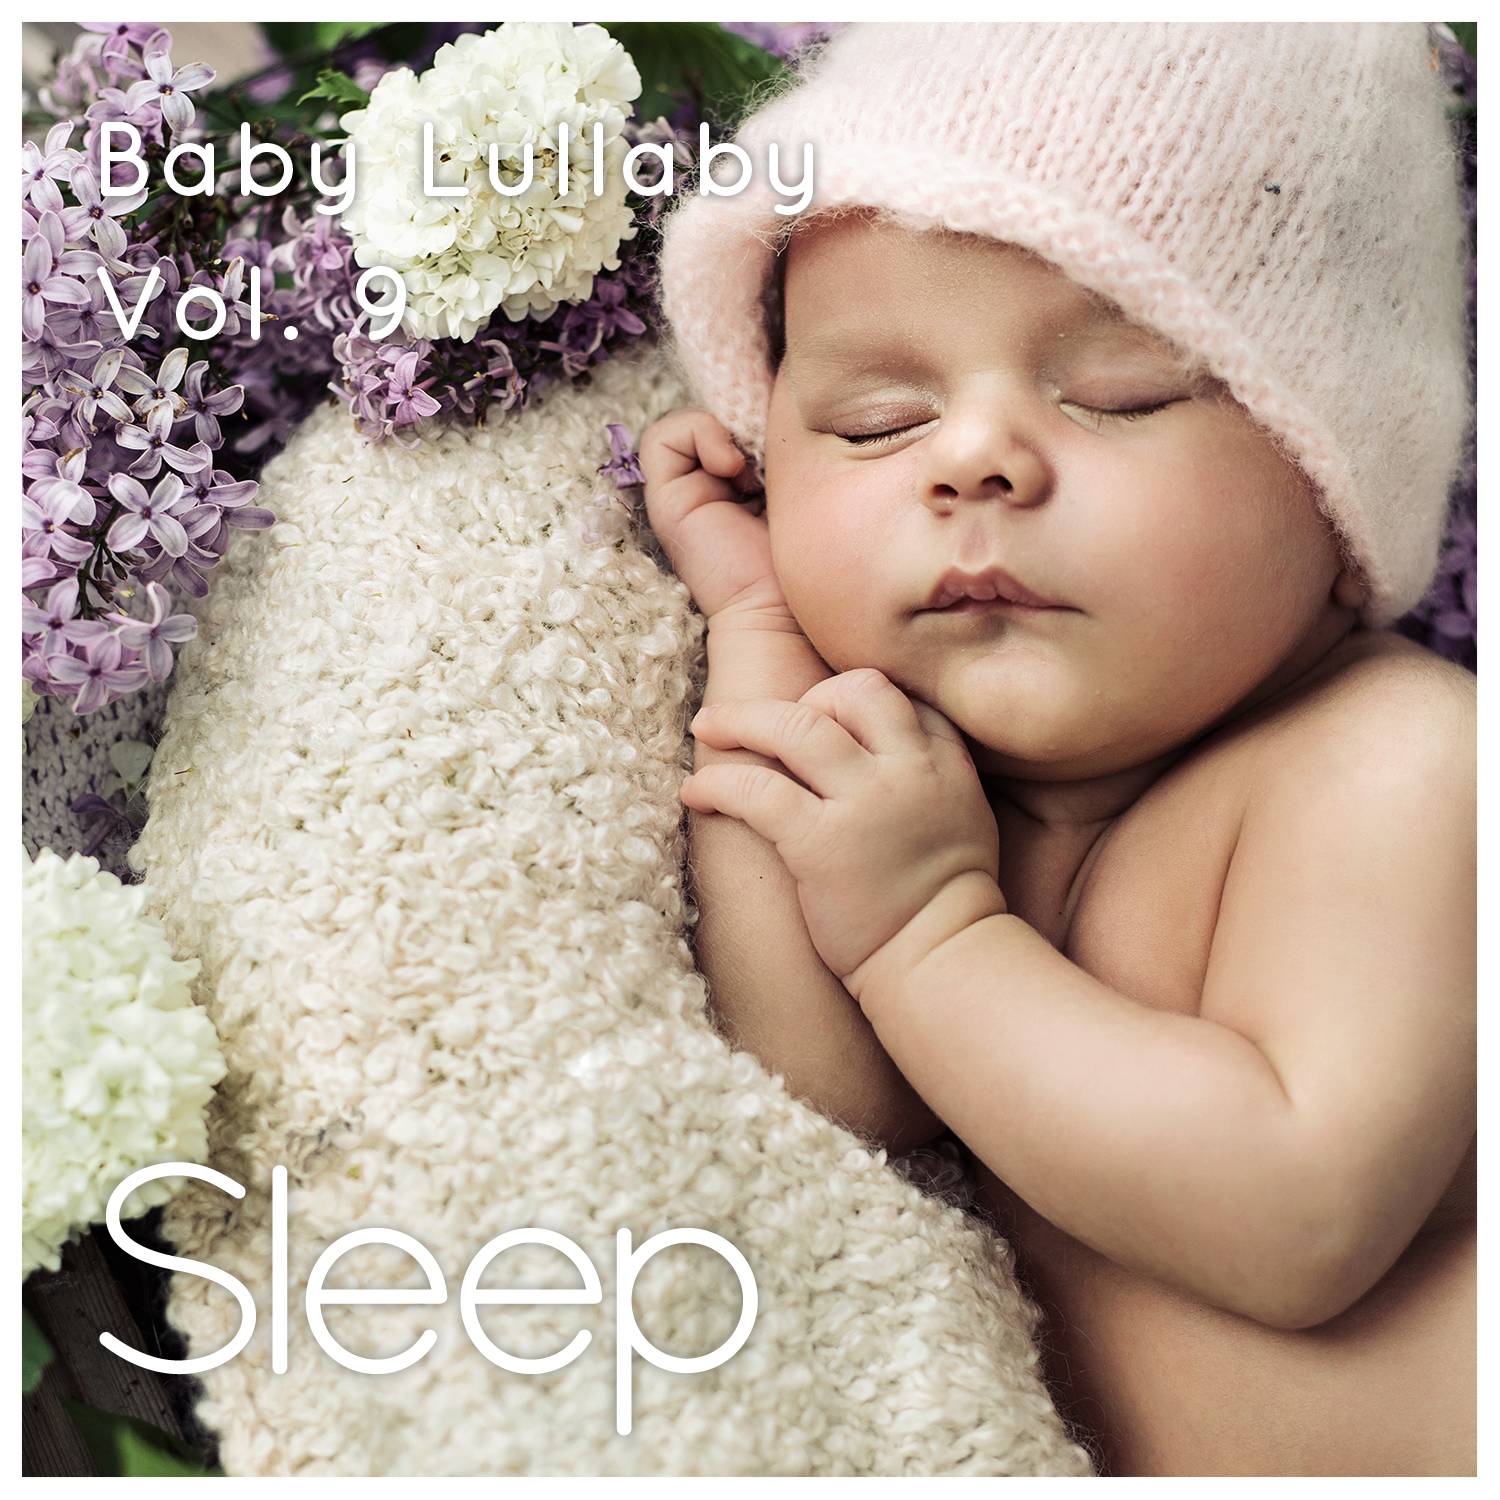 Baby Sleep Ambient Lullaby, Pt. 45